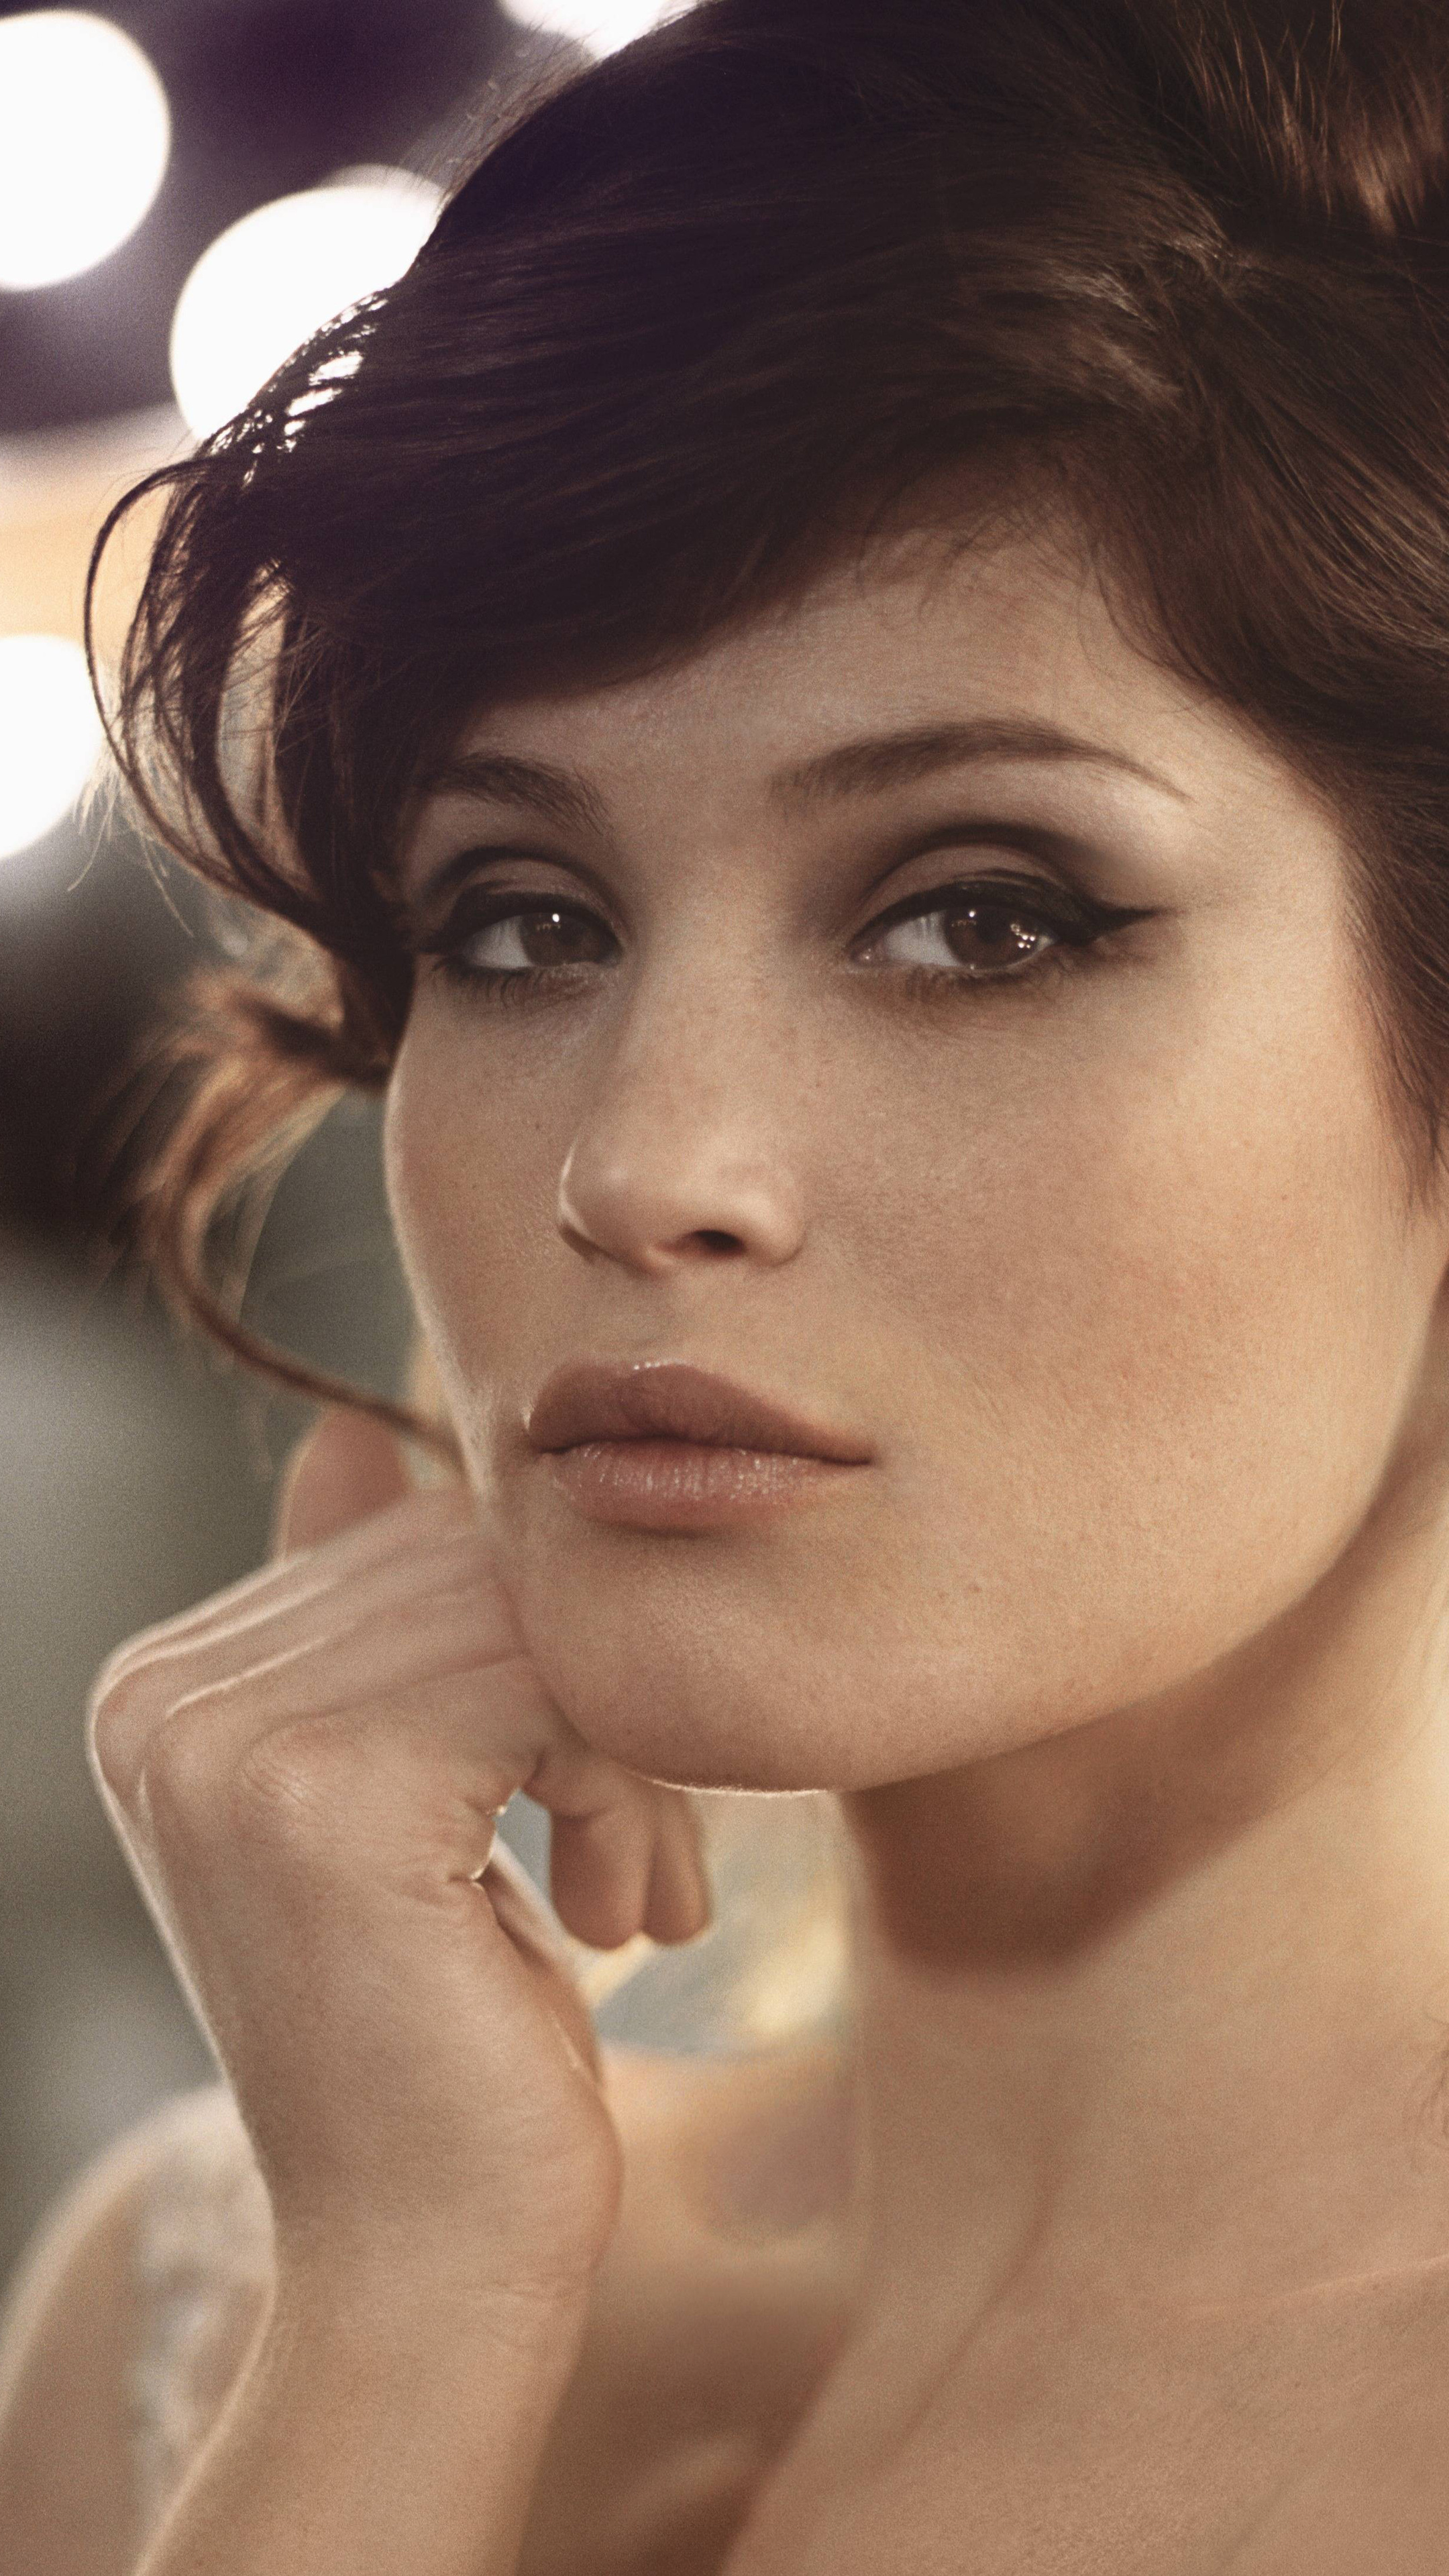 Gemma Arterton: Appeared in a number of films, including The Disappearance of Alice Creed, Tamara Drewe, Clash of the Titans. 2160x3840 4K Background.